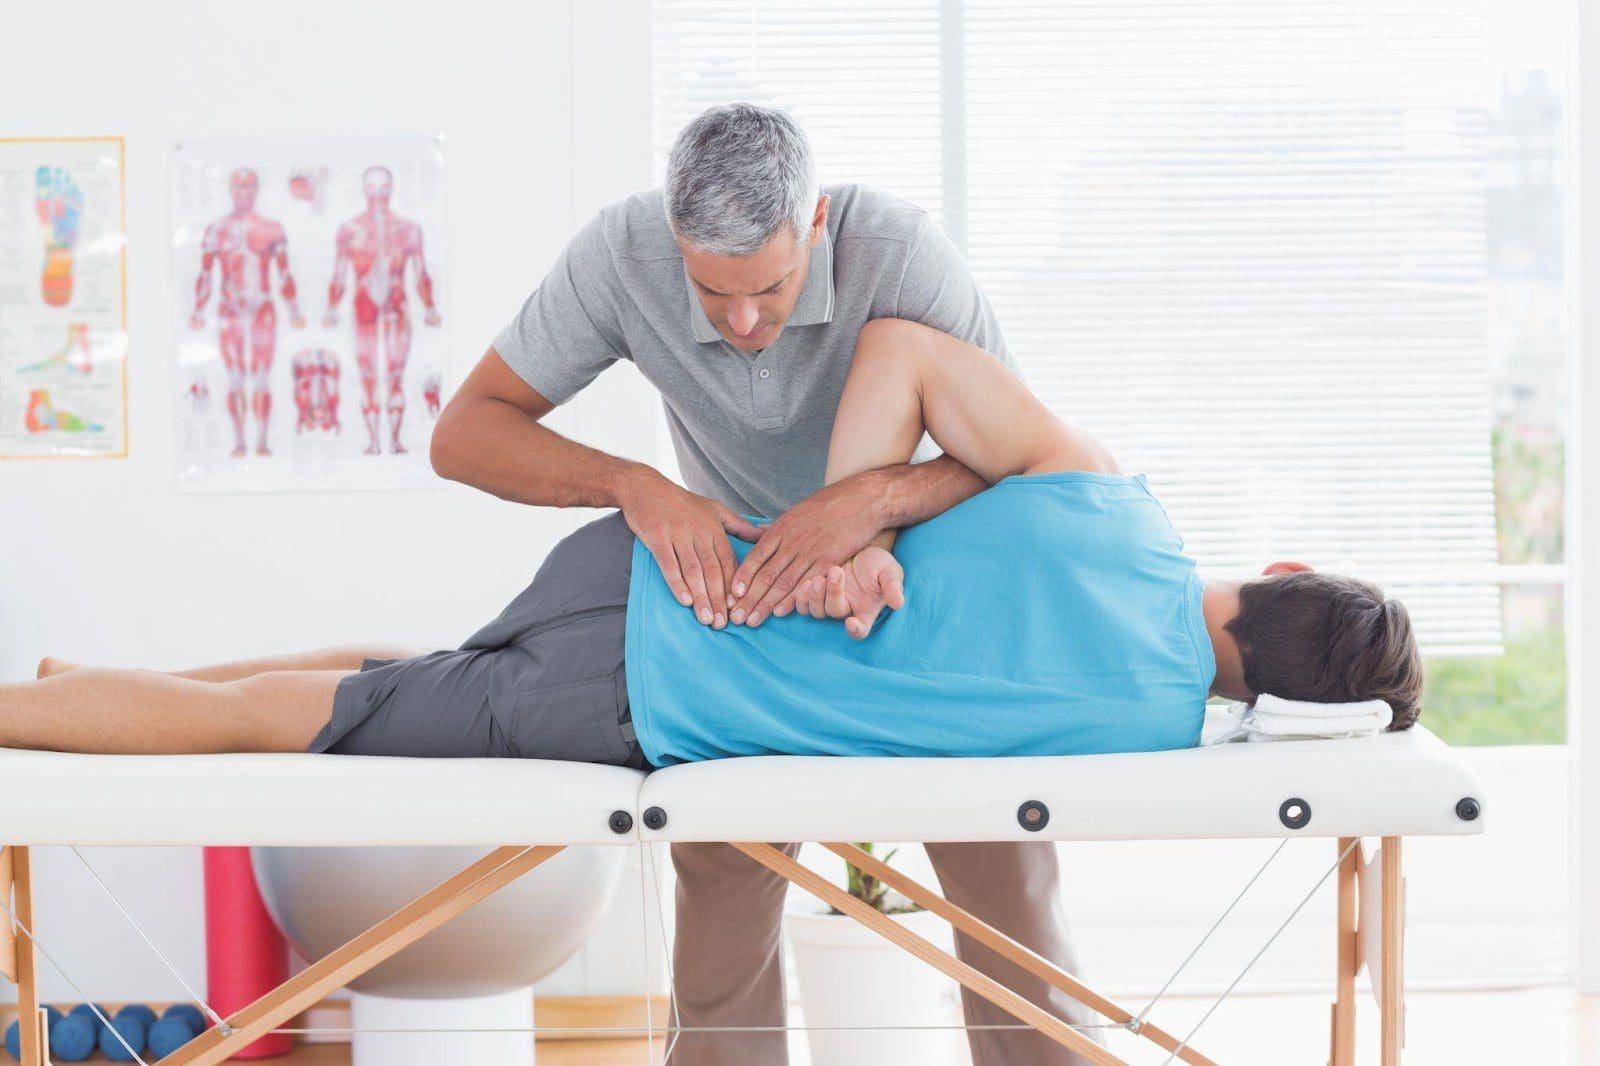 Chiropractor working on a young male patient's lower back.